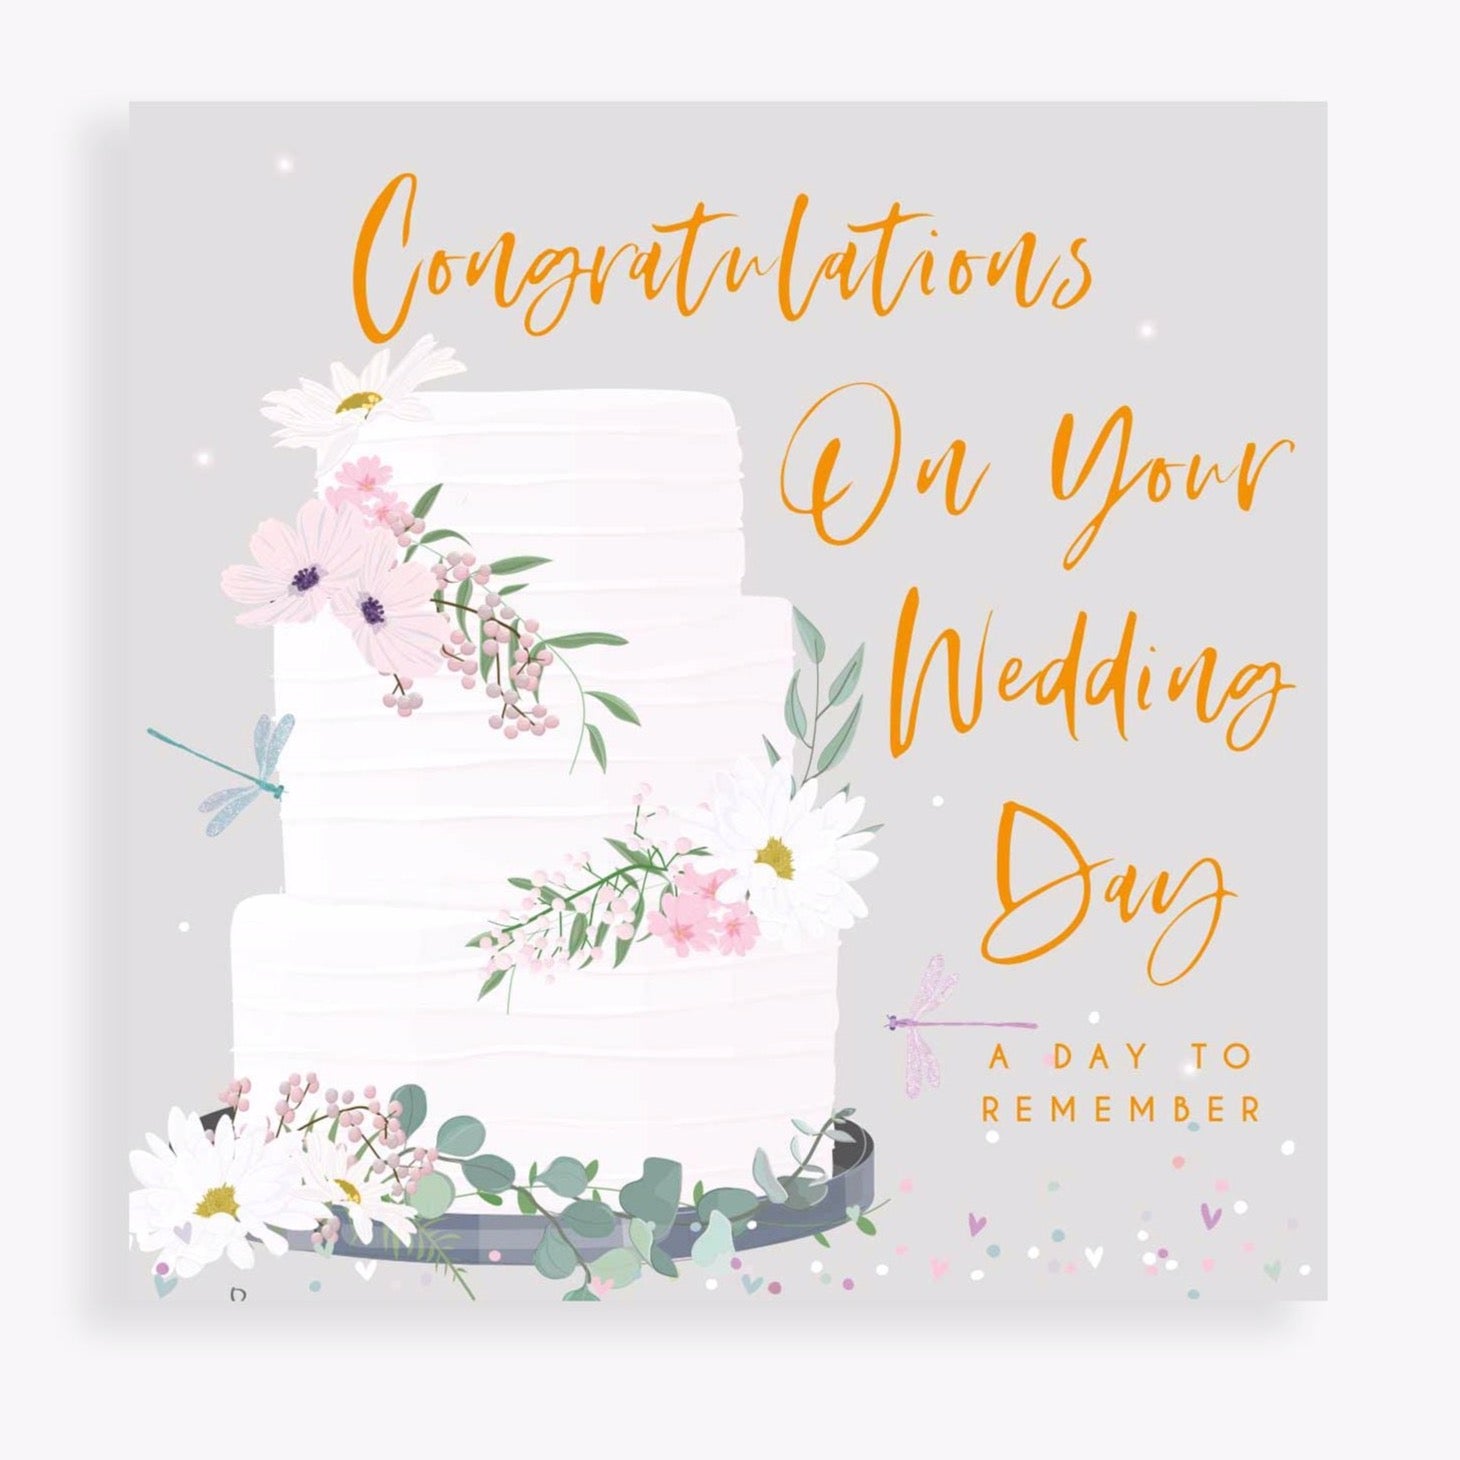 Elle - Congratulations on Your Wedding Day Card